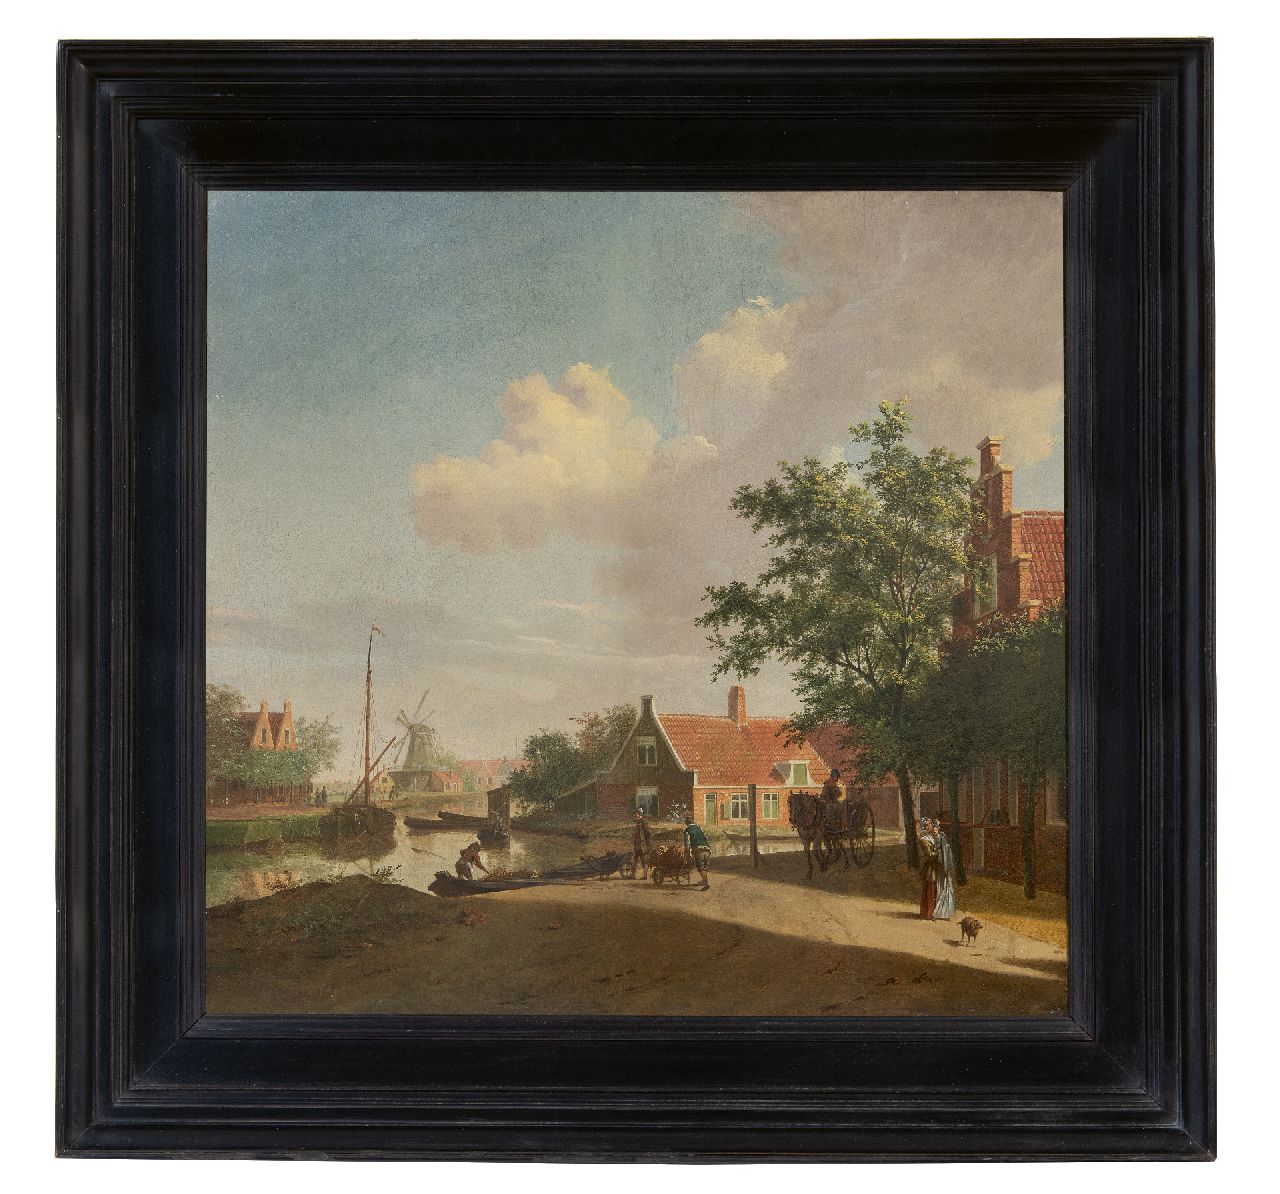 Toorenburgh G.  | Gerrit Toorenburgh | Paintings offered for sale | A village scene with activities along a canal, oil on panel 42.6 x 44.6 cm, signed l.l. with initials and dated 1769